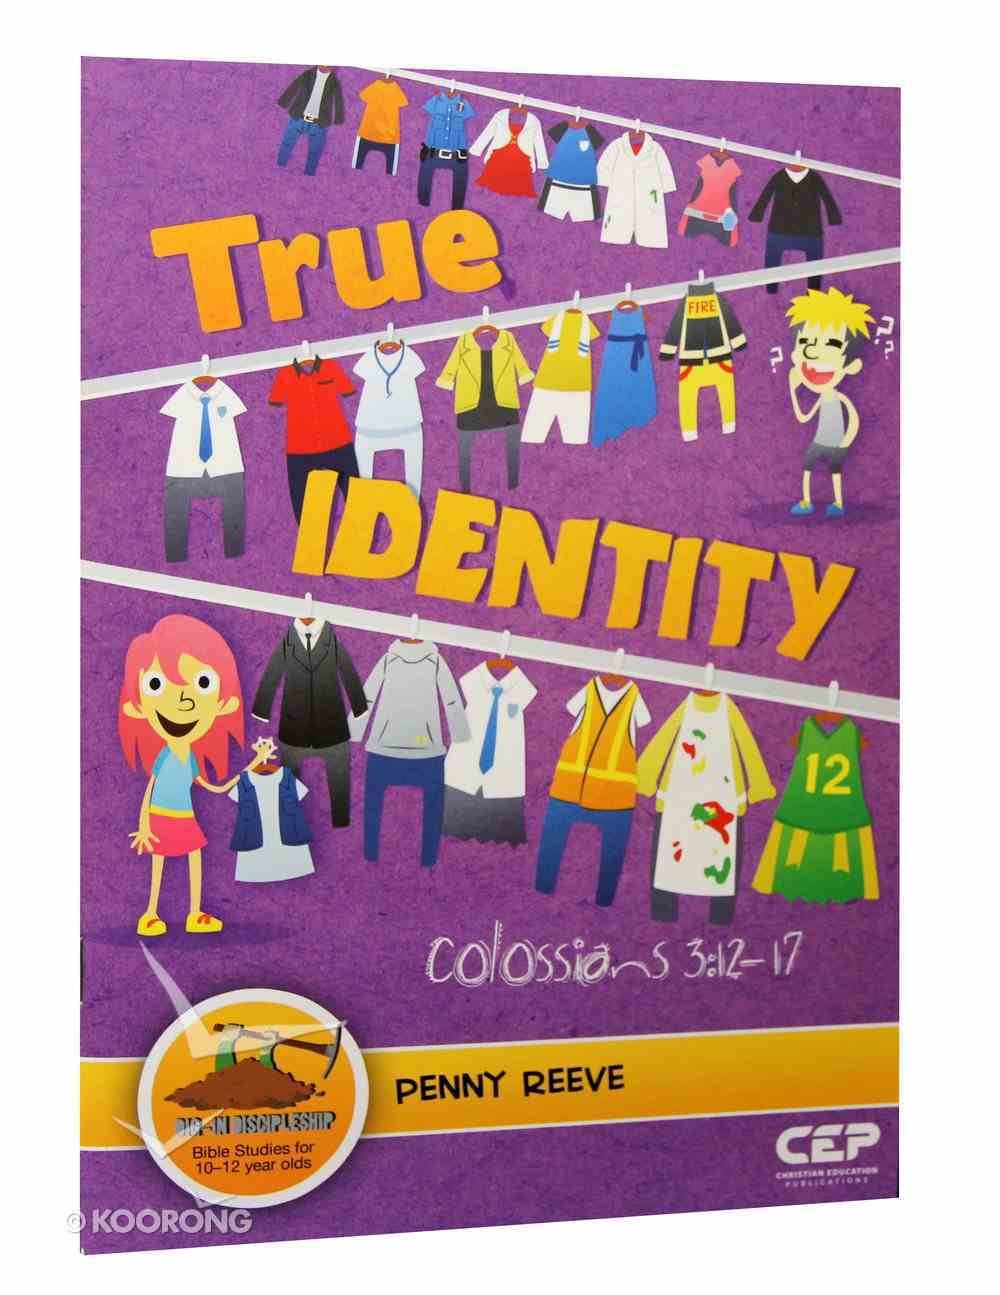 True Identity - Colossians 3: 12-17 (Dig In Discipleship Series) Paperback